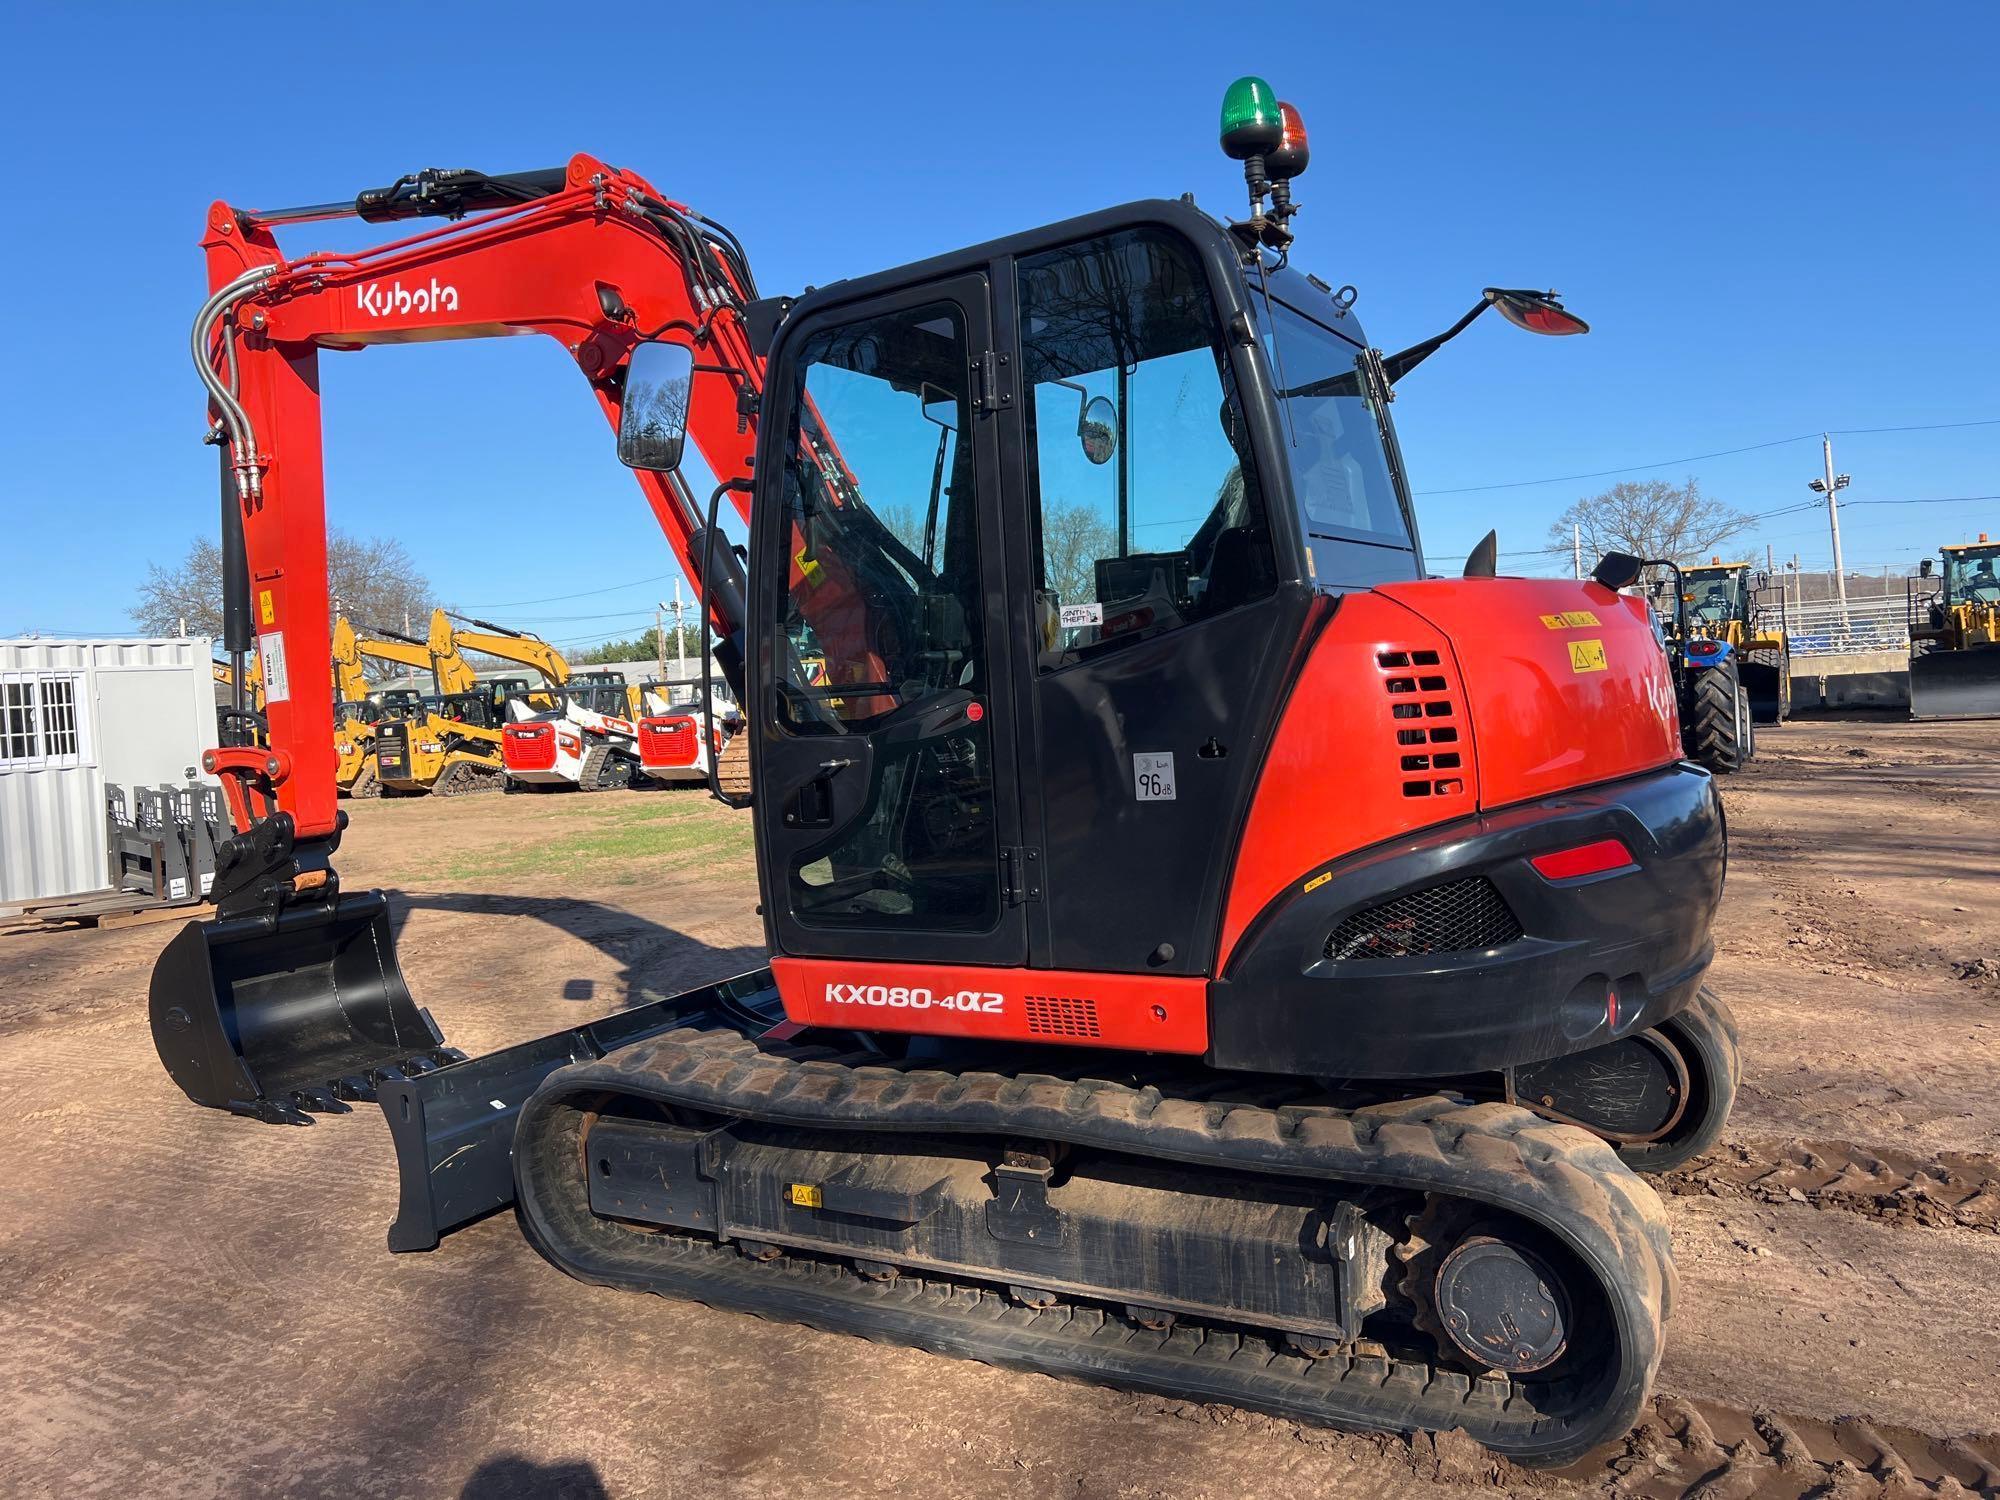 2023 KUBOTA KX080-4A2 HYDRAULIC EXCAVATOR SN:79533 powered by diesel engine, equipped with Cab, air,